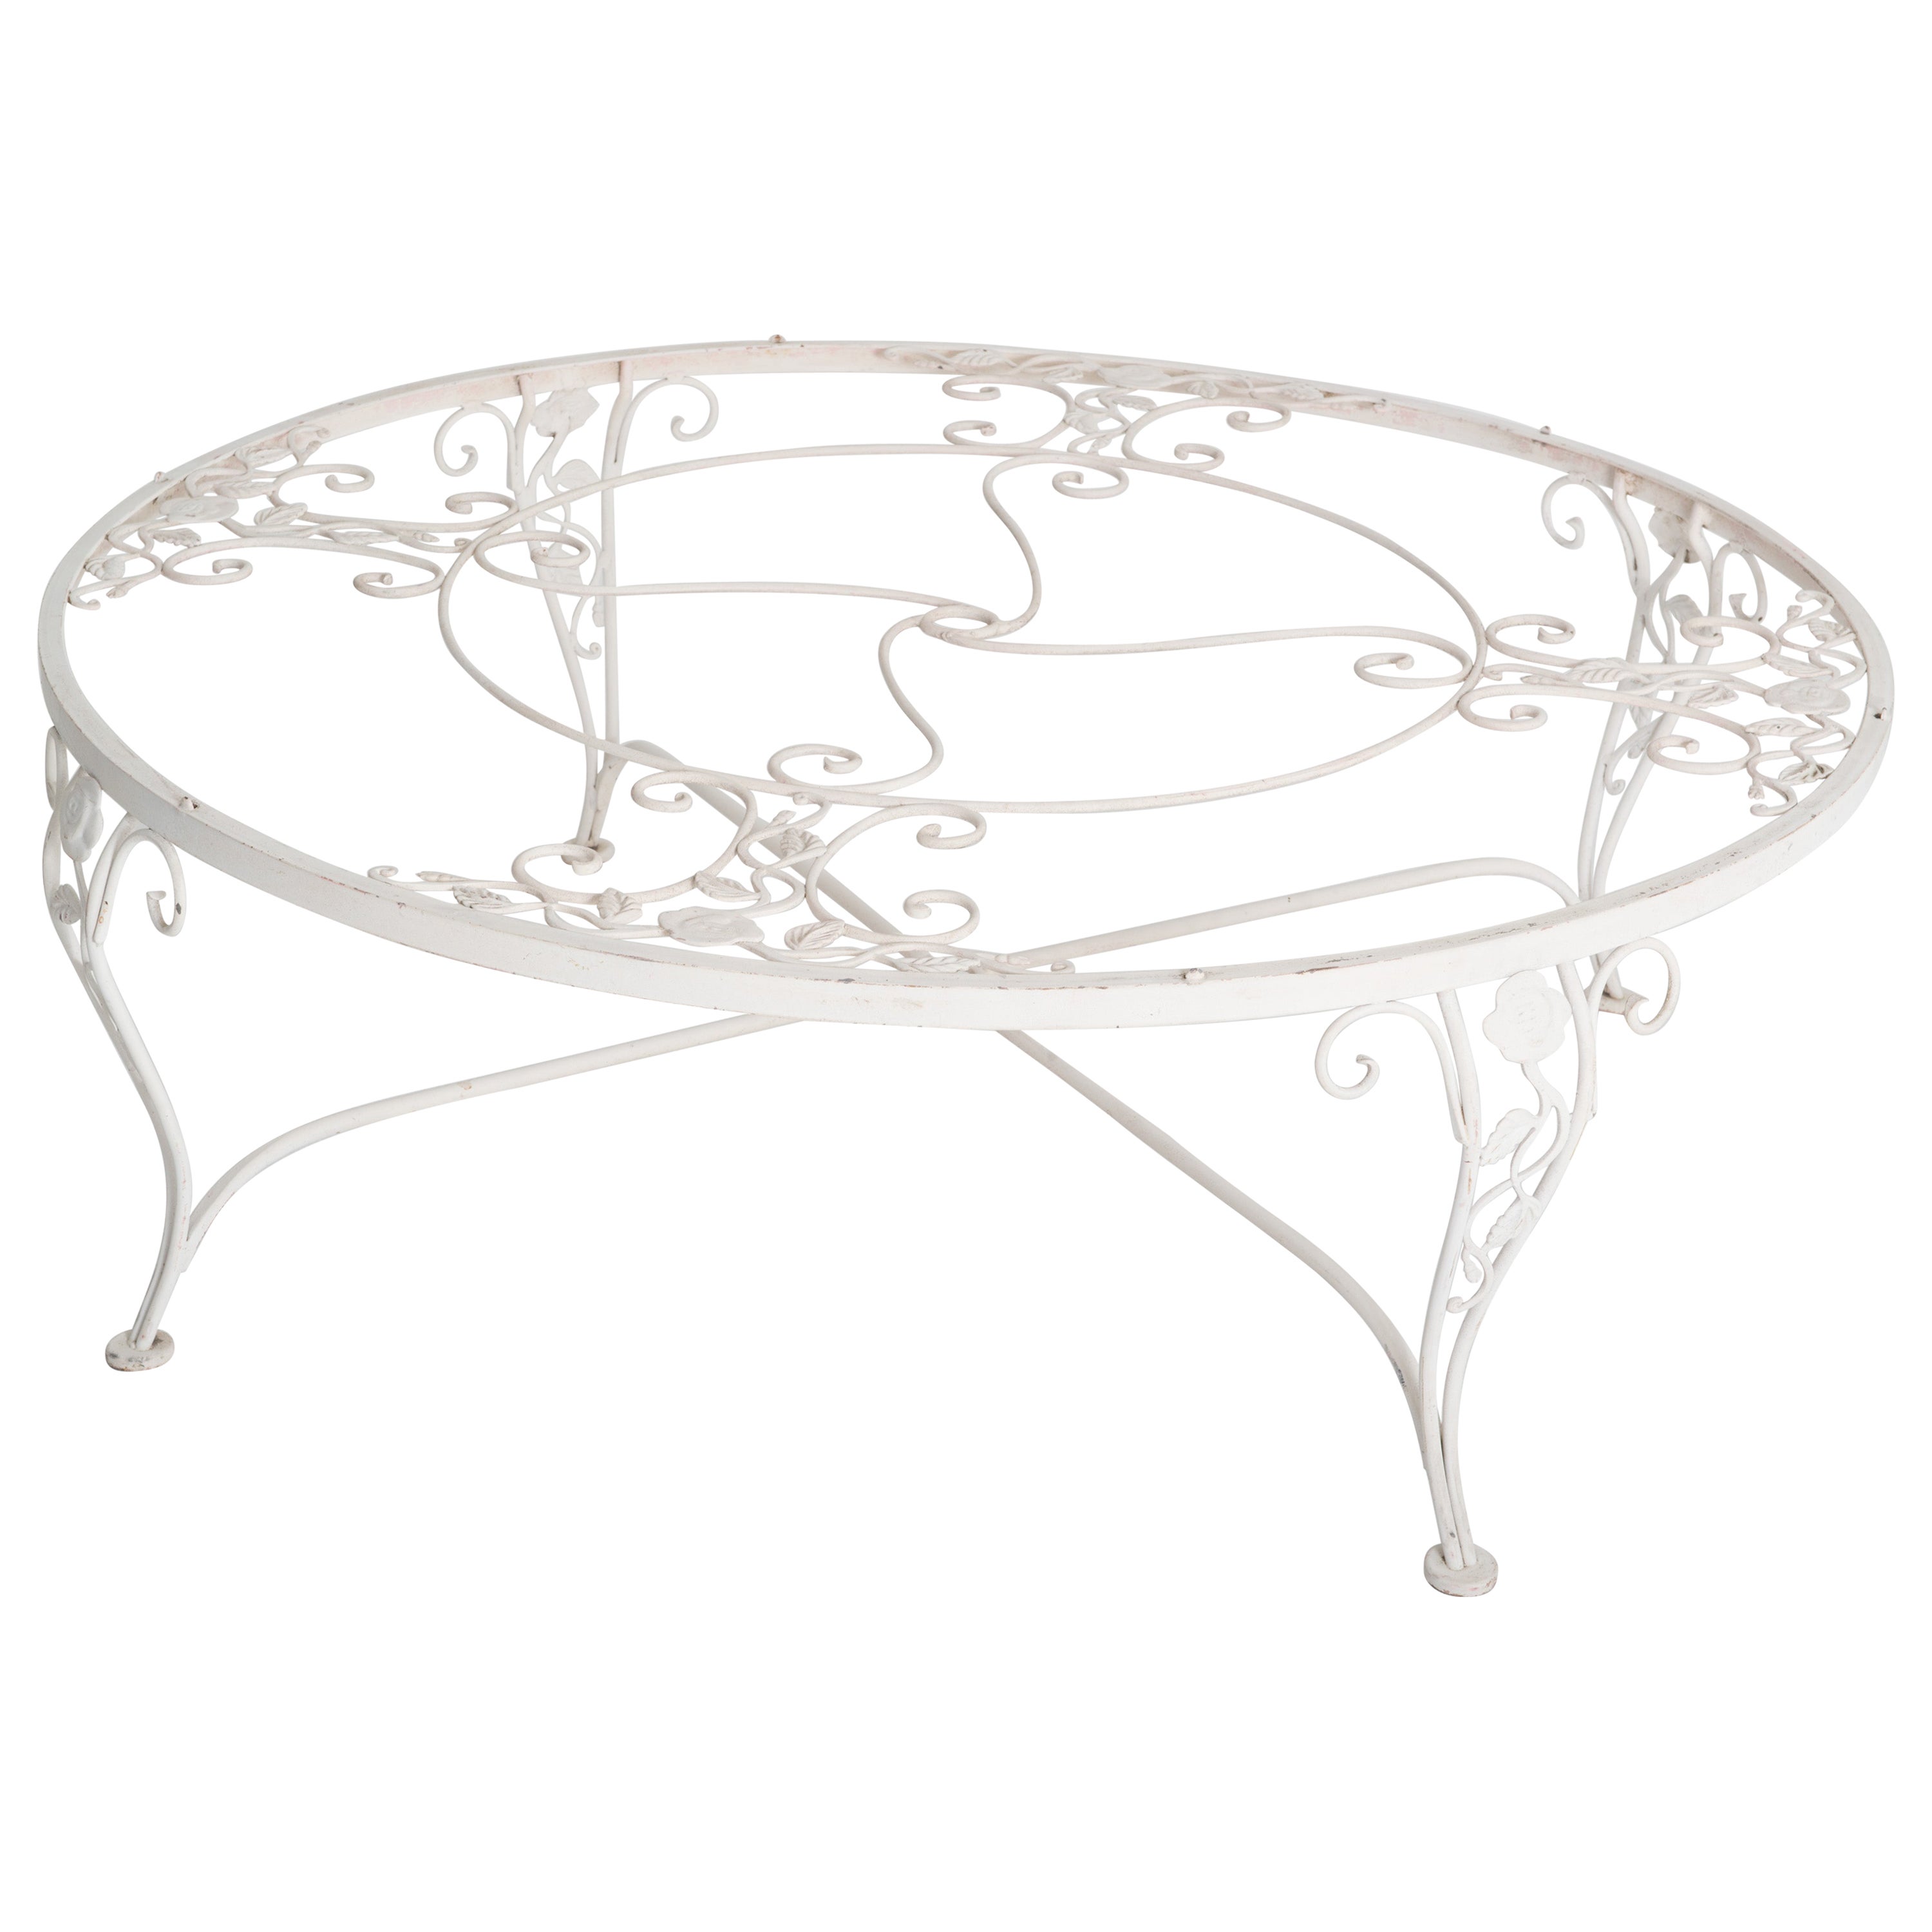 Woodard Chantilly Rose Wrought Iron Coffee Table